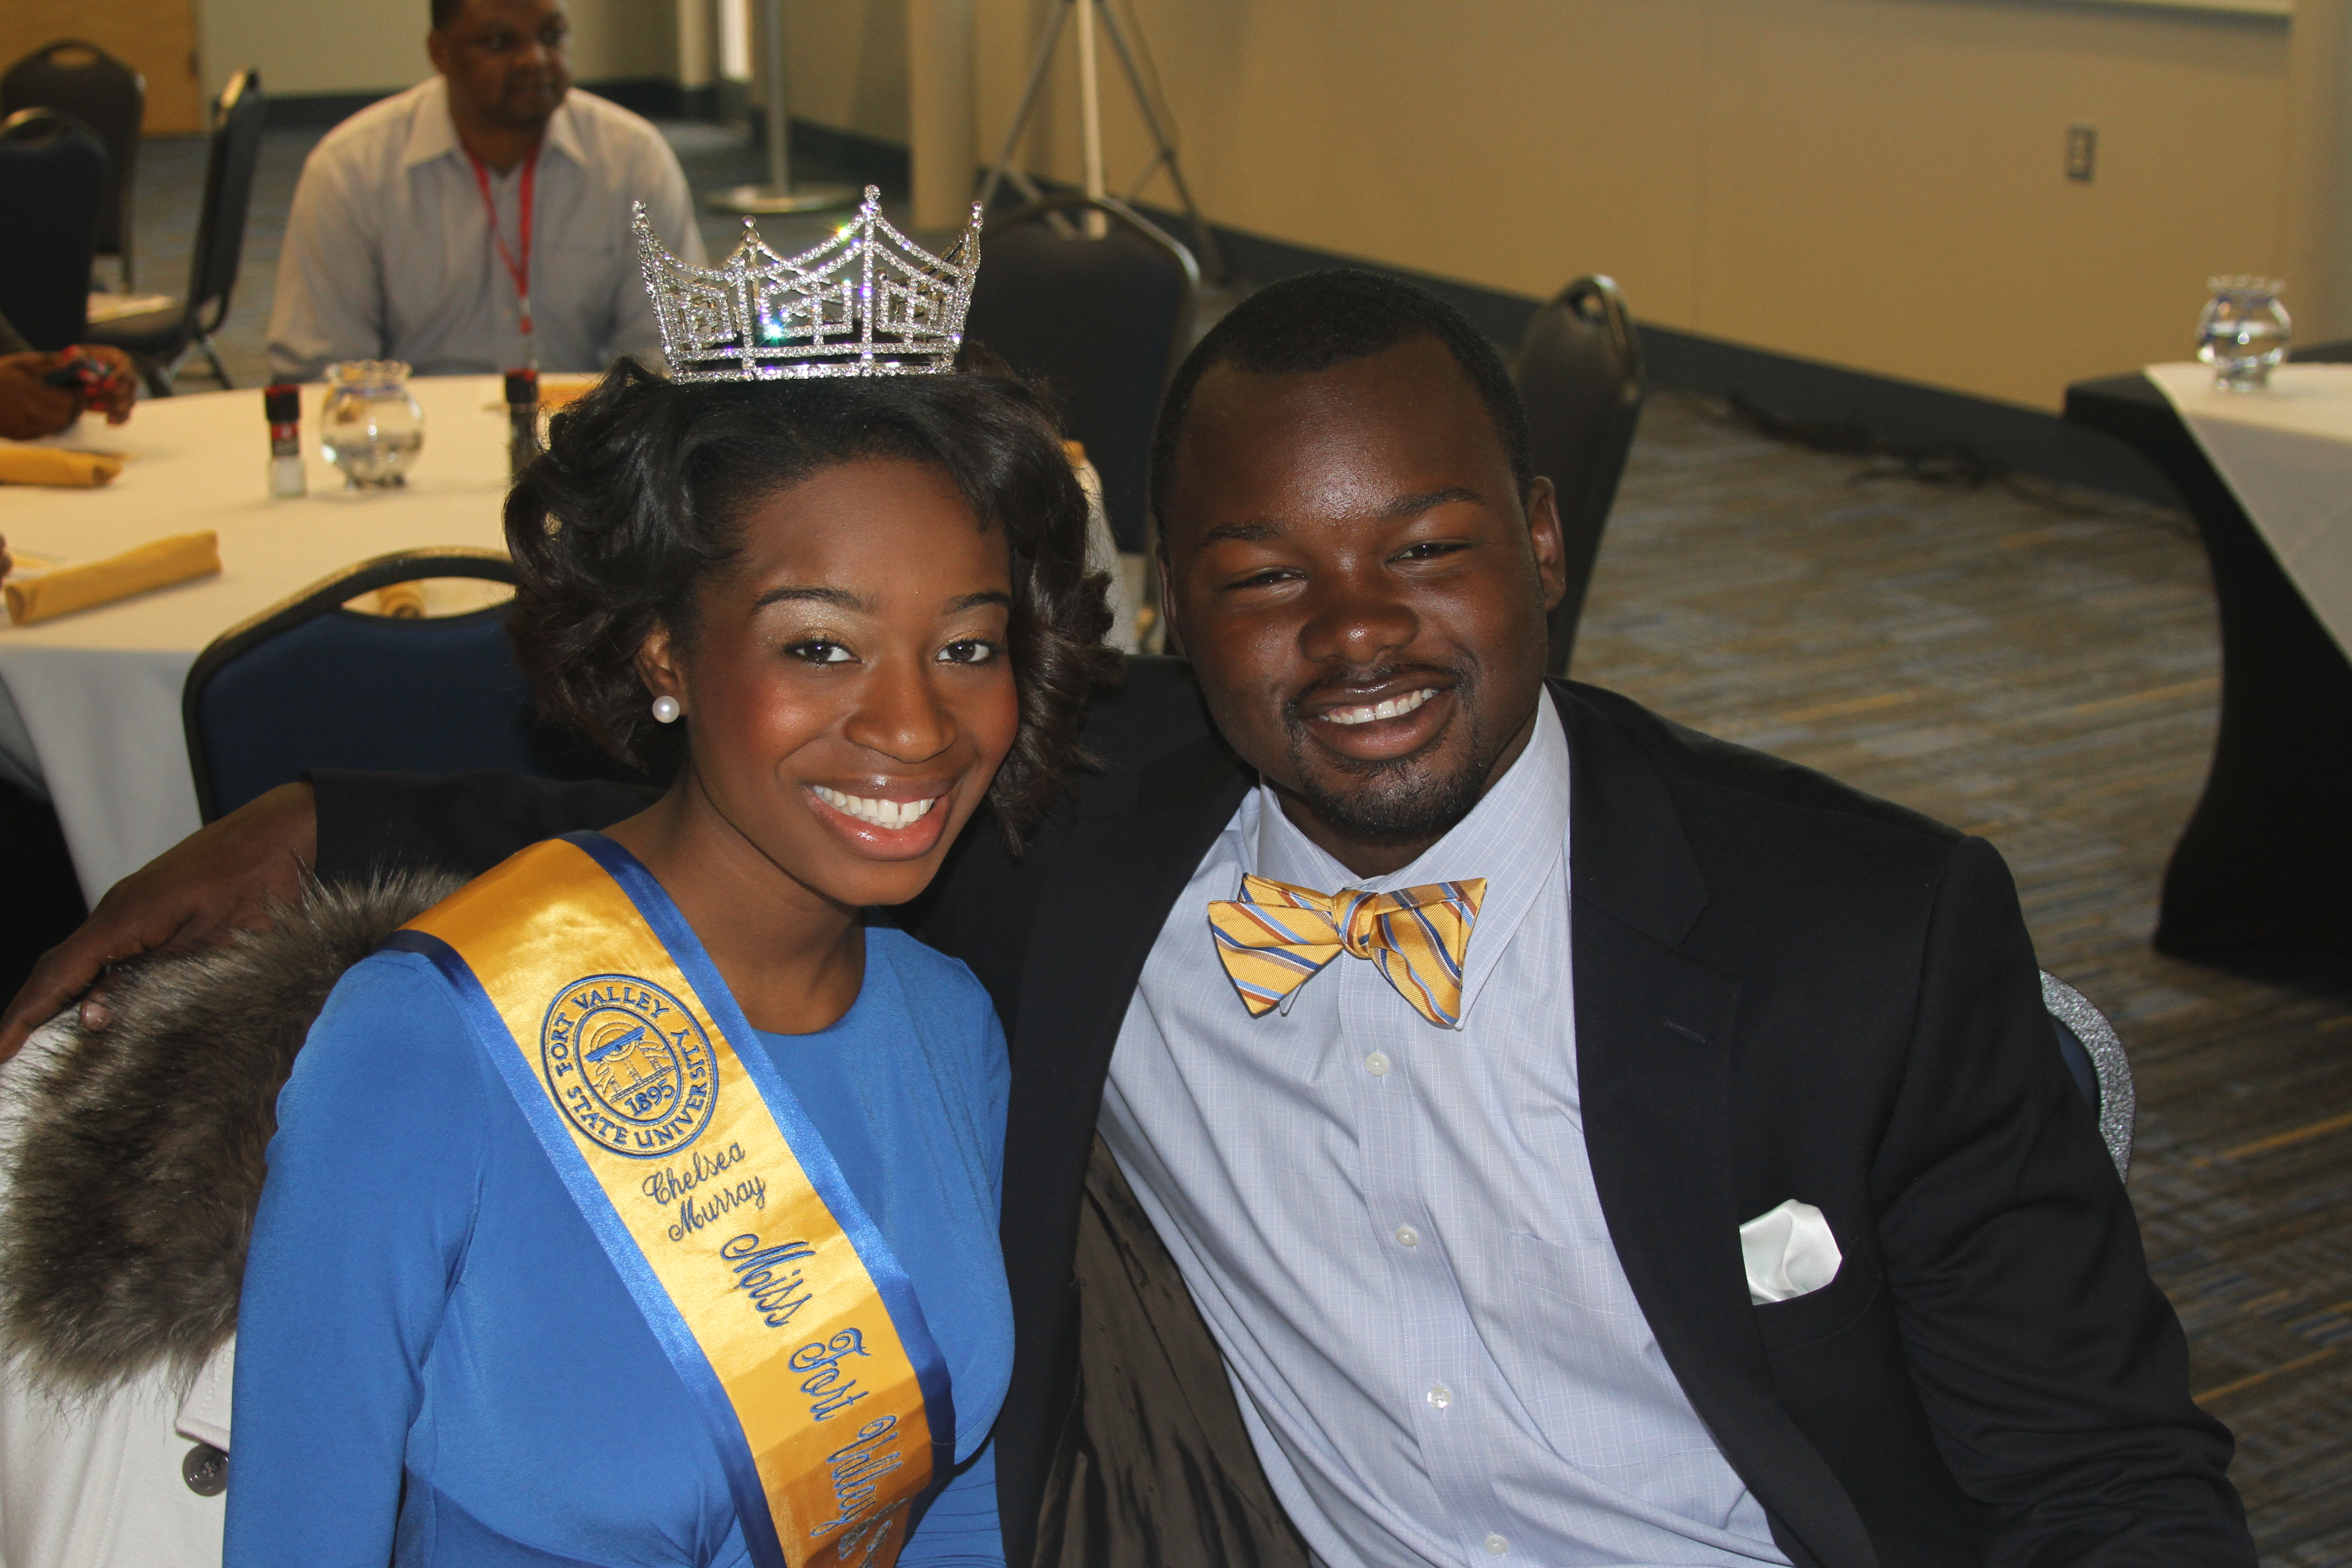 GREETED UPON ARRIVAL BY MISS FVSU & HER OFFICIAL ESCORT